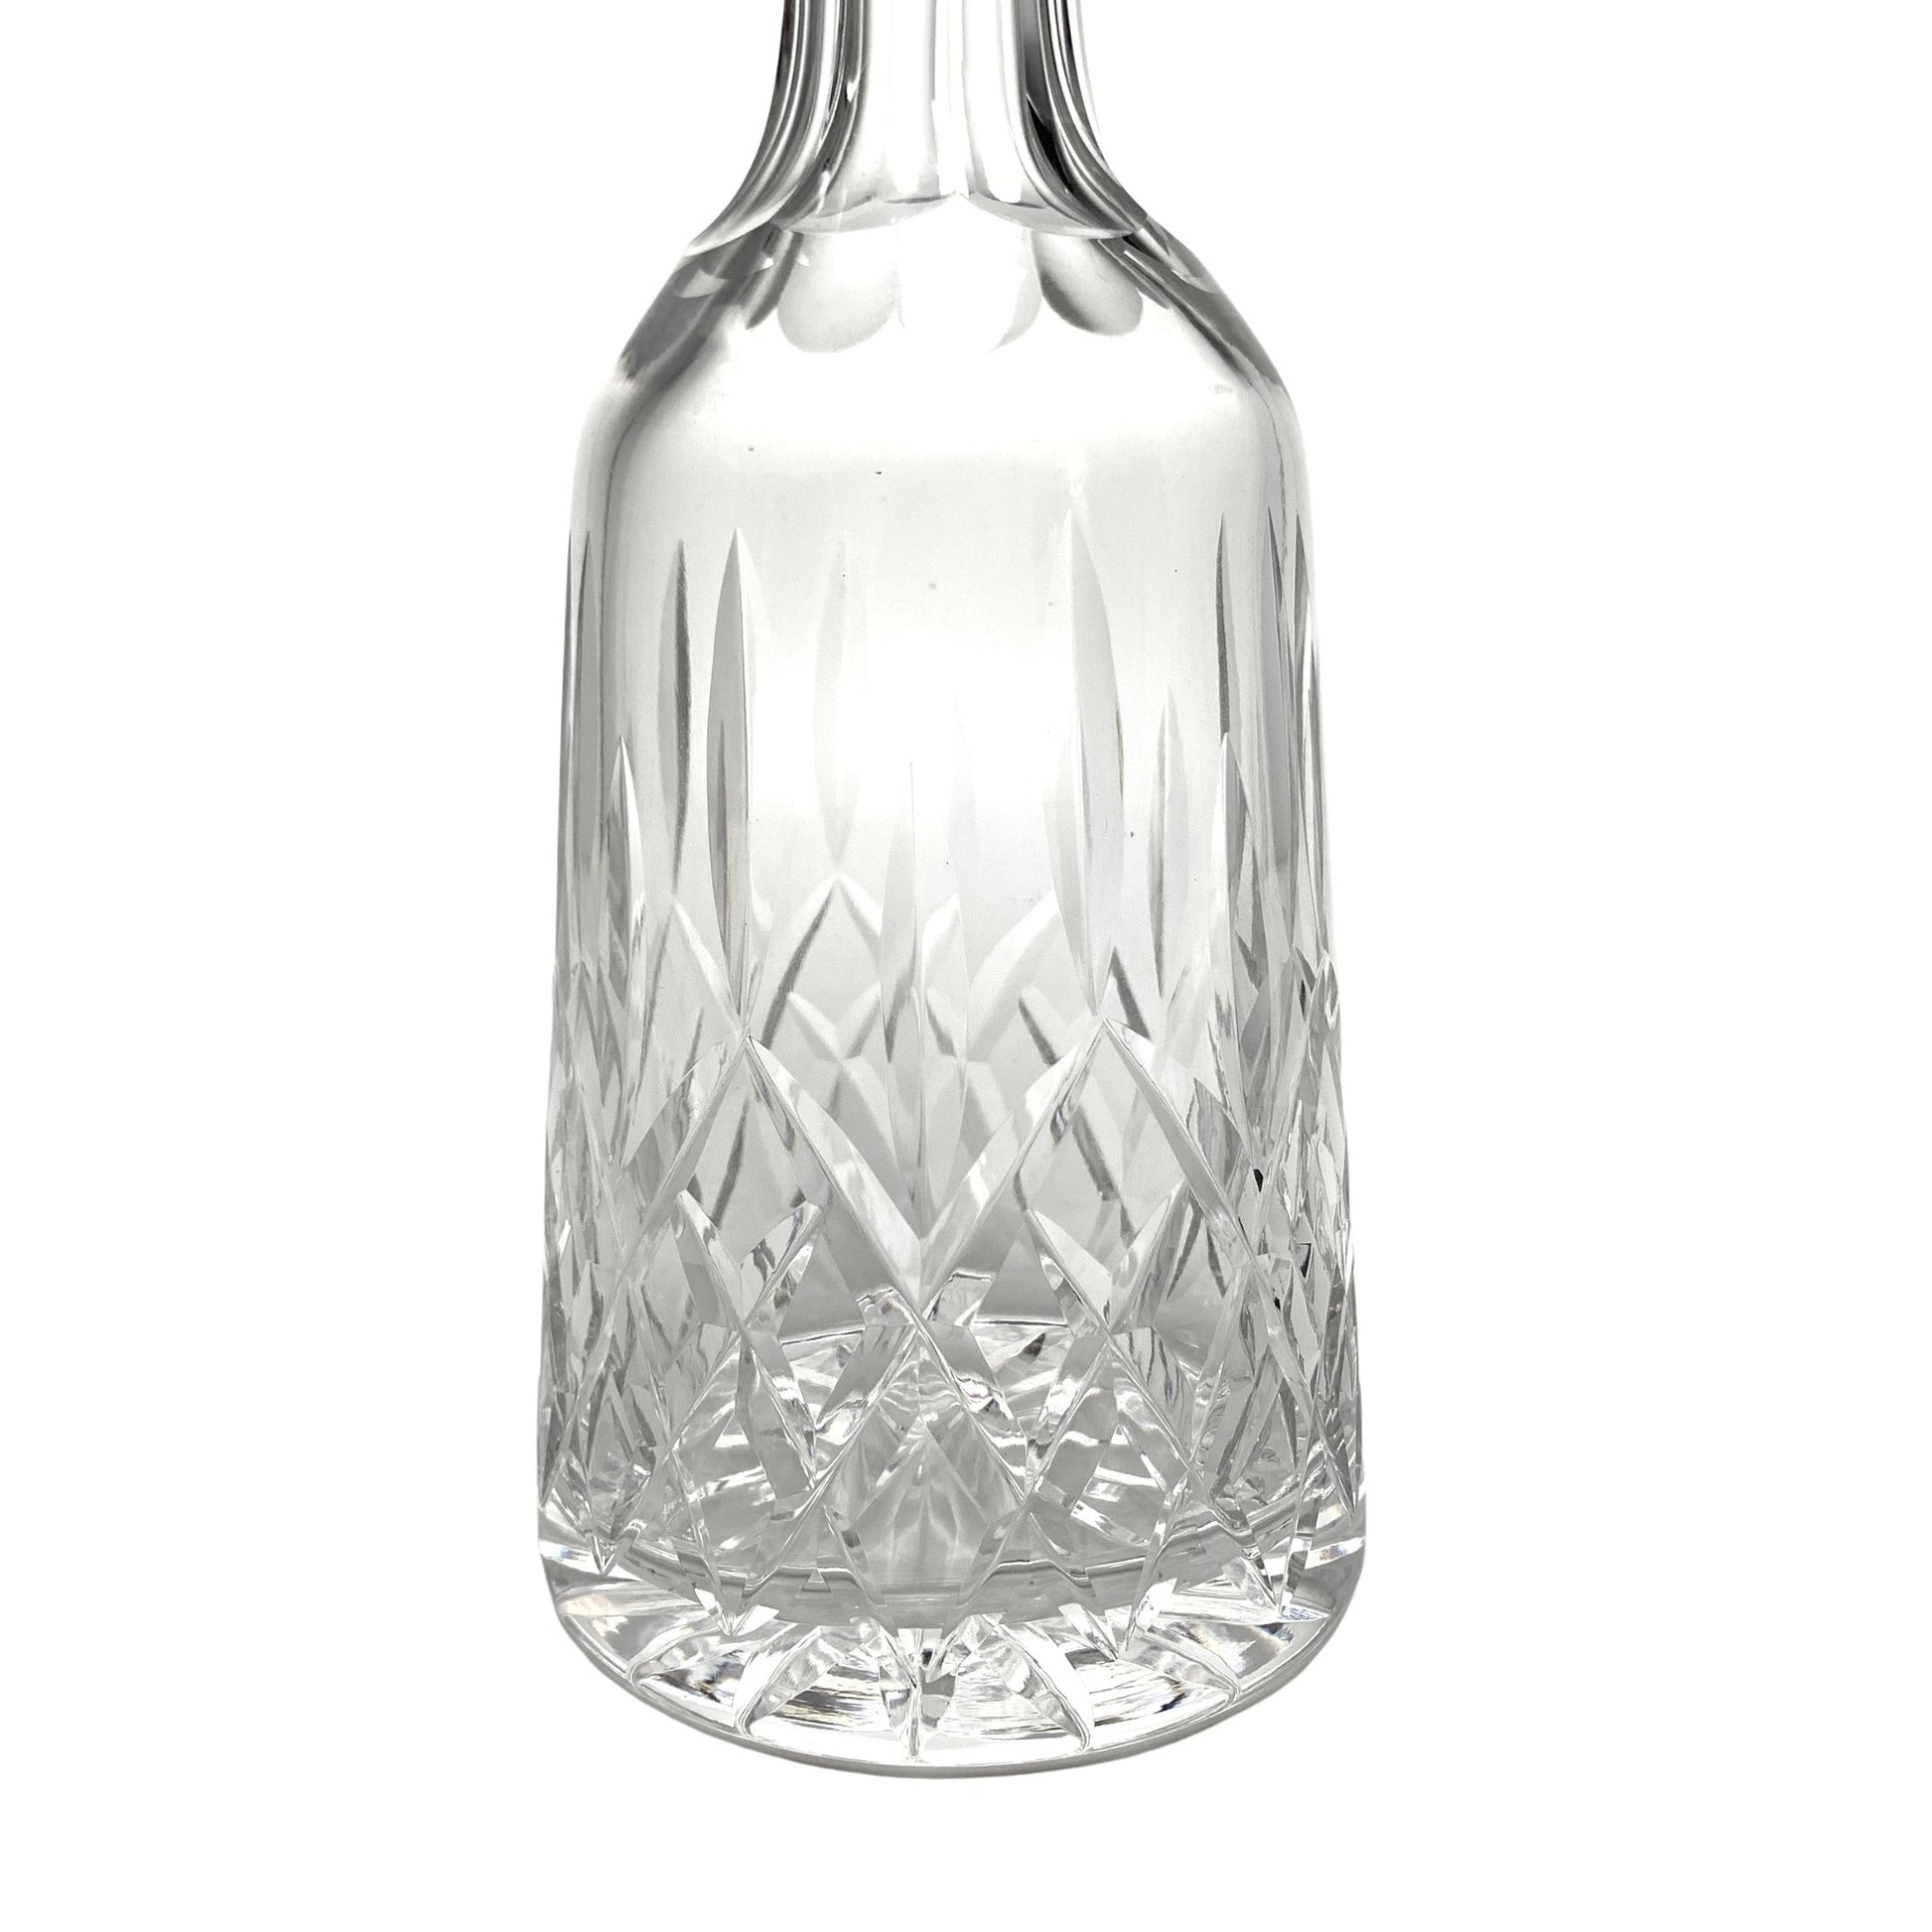 Waterford Crystal Decanter – Antiques Ireland